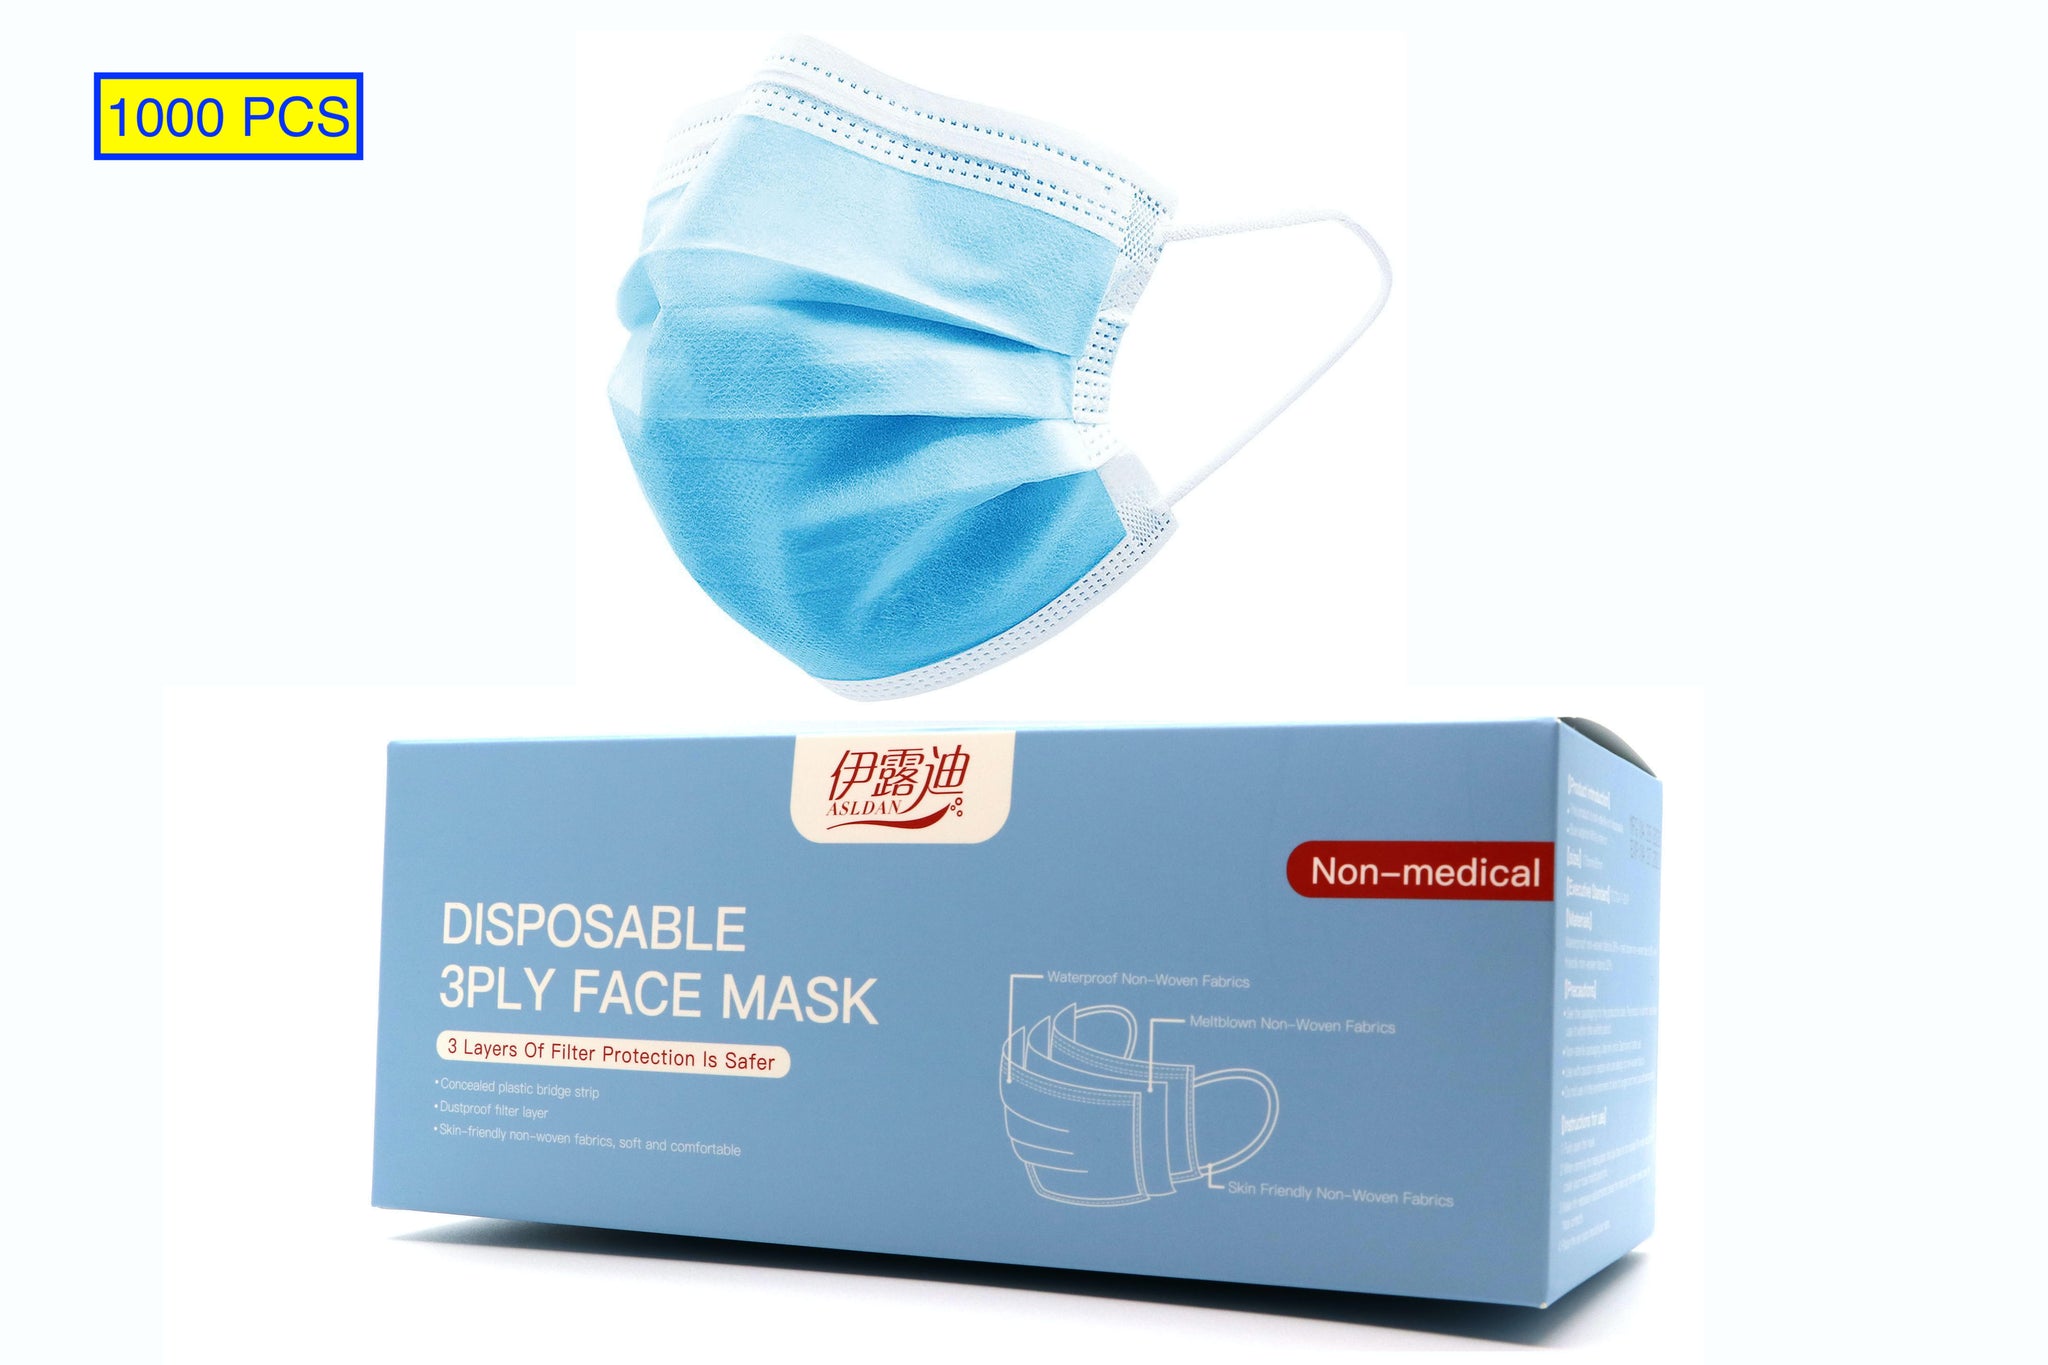 1,000 PCS Disposable Face Mask Mouth & Nose Protector Respirator Masks with Filter